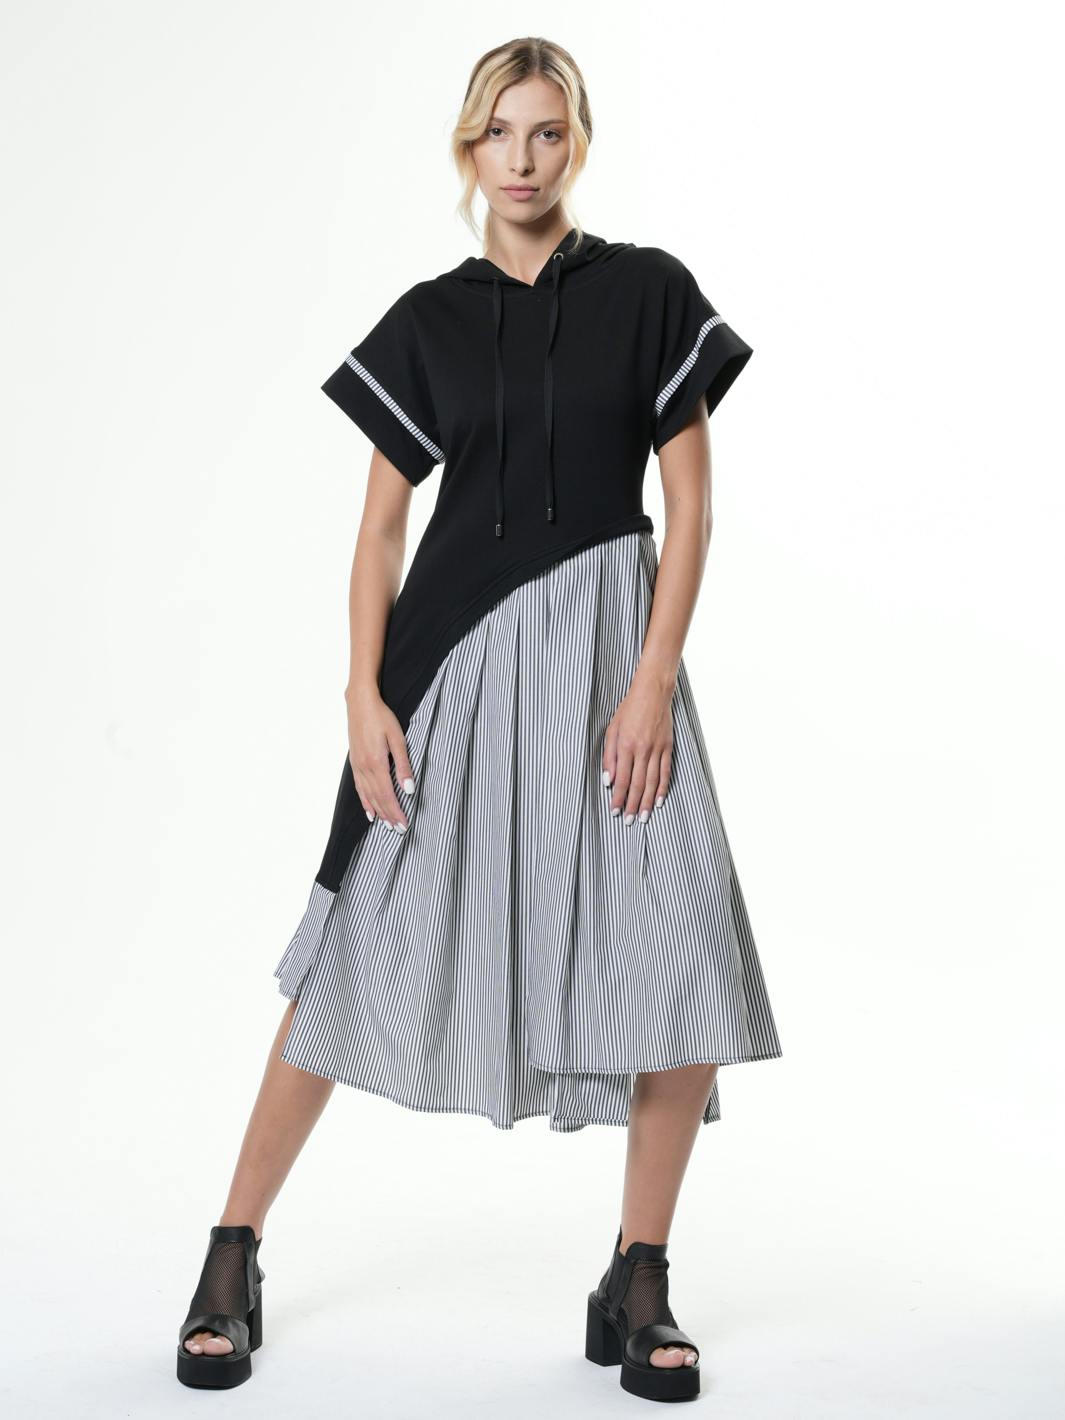 Asymmetric Hooded Dress With Short Sleeves , a product by METAMORPHOZA